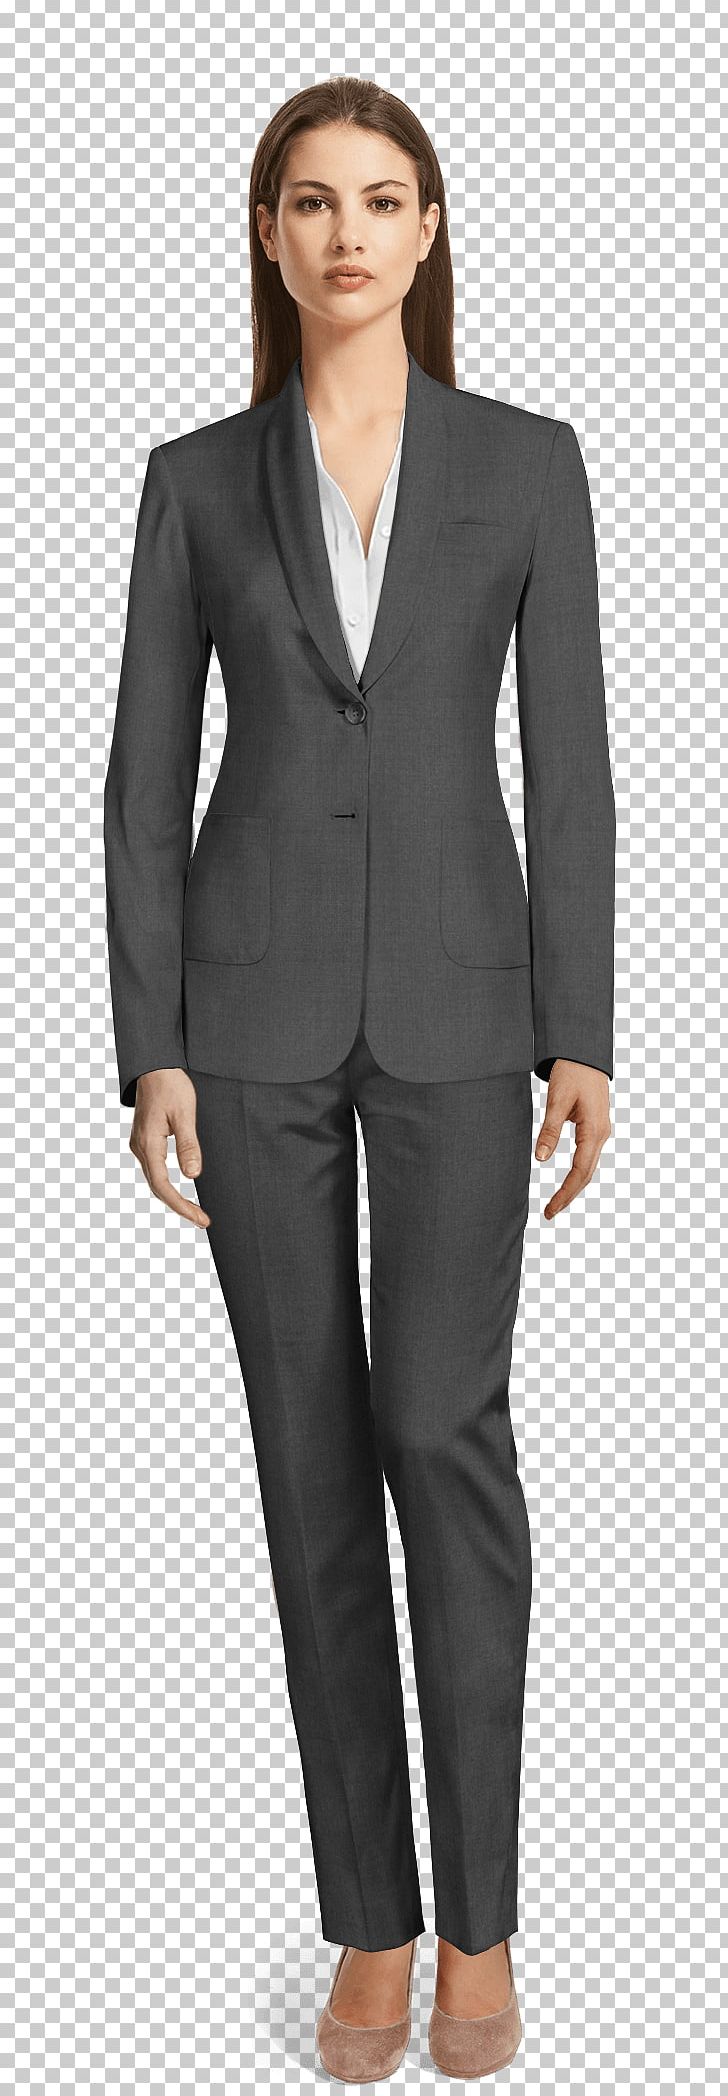 Pant Suits Double-breasted Clothing Jakkupuku PNG, Clipart, Blazer, Business, Businessperson, Coat, Double Breasted Free PNG Download